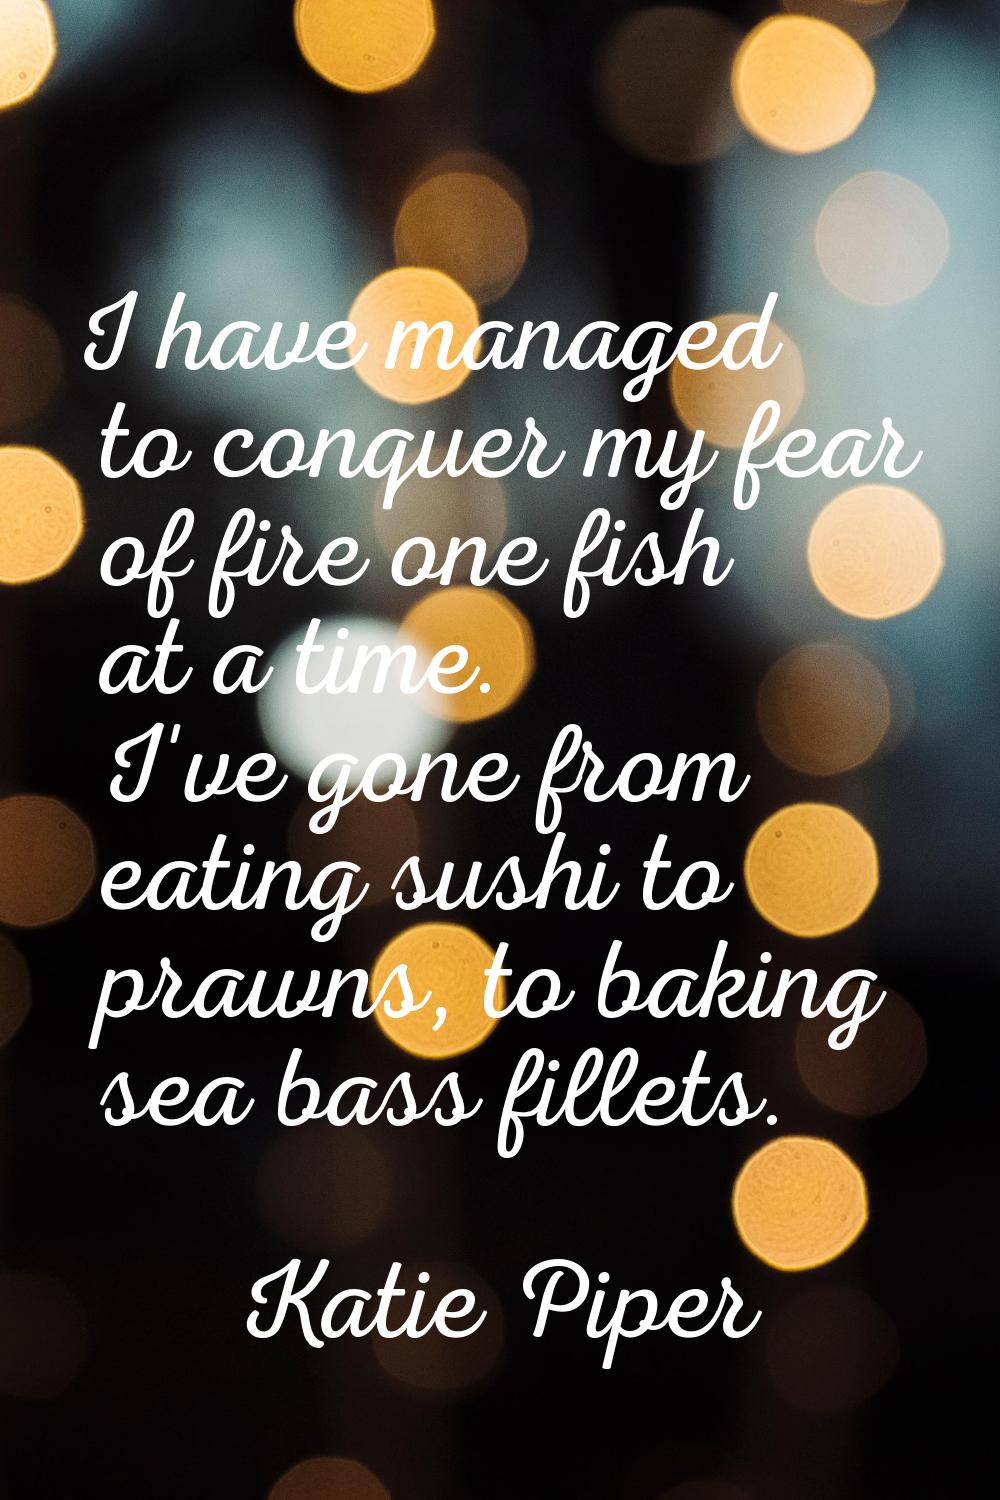 I have managed to conquer my fear of fire one fish at a time. I've gone from eating sushi to prawns